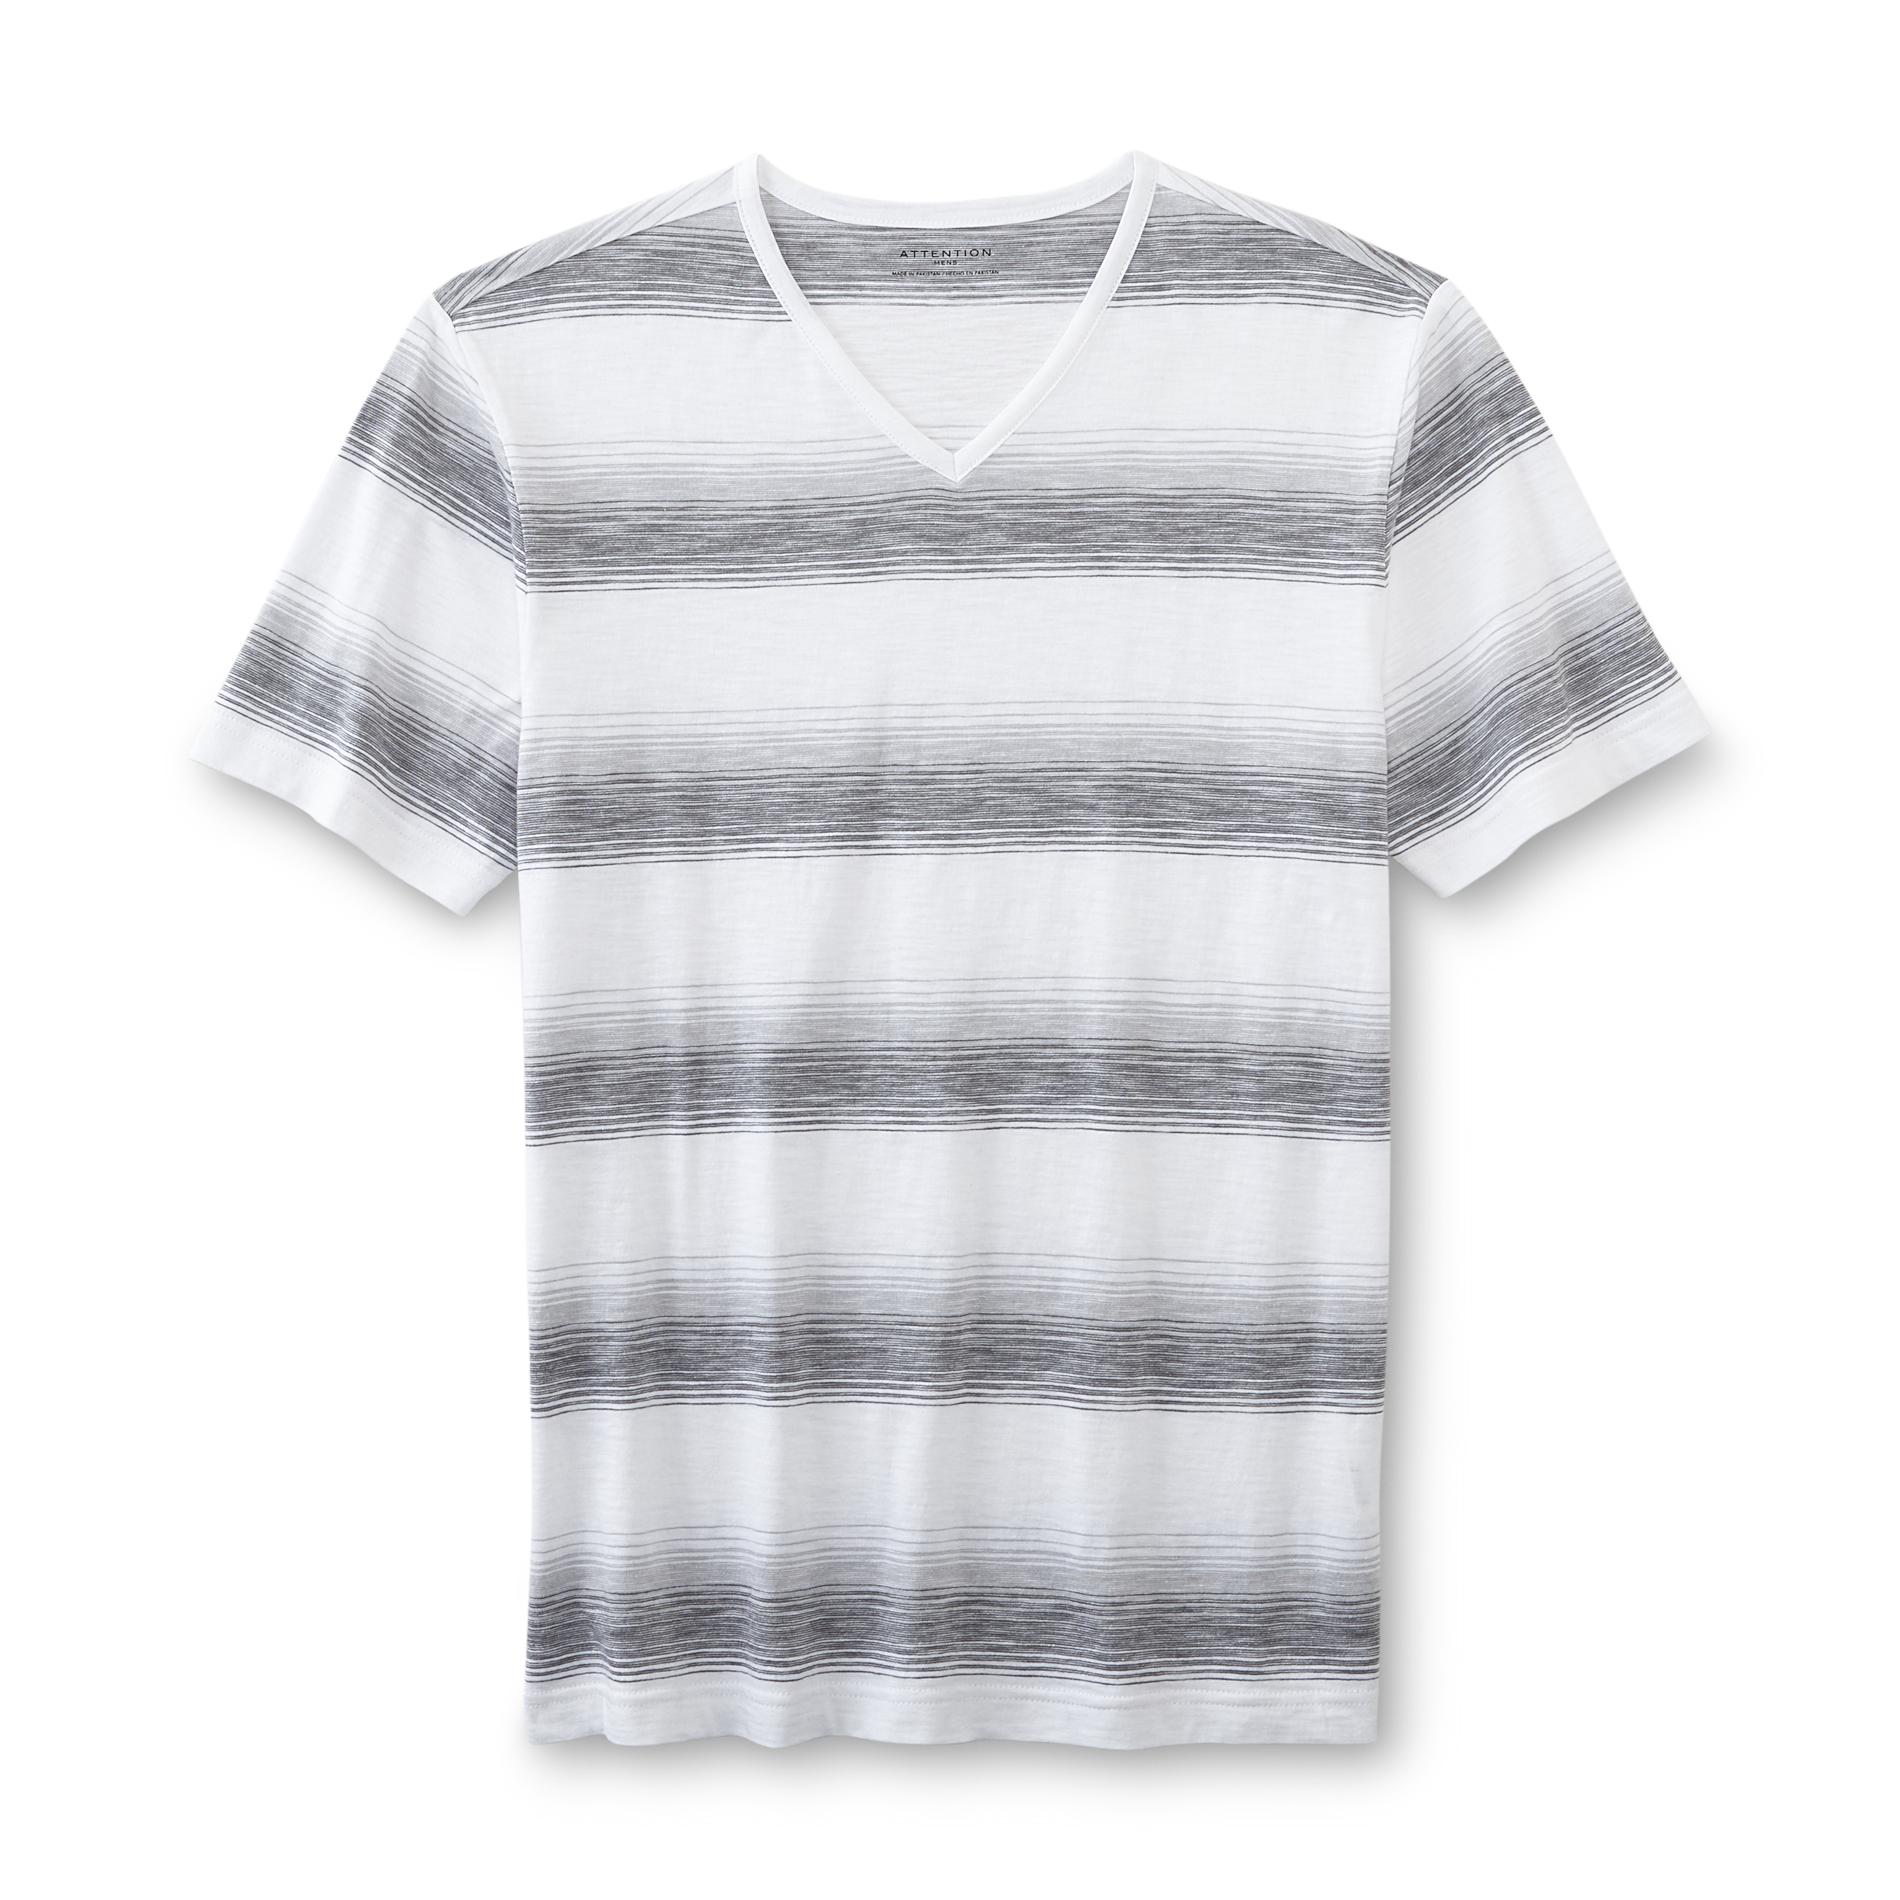 Attention Men's T-Shirt - Striped